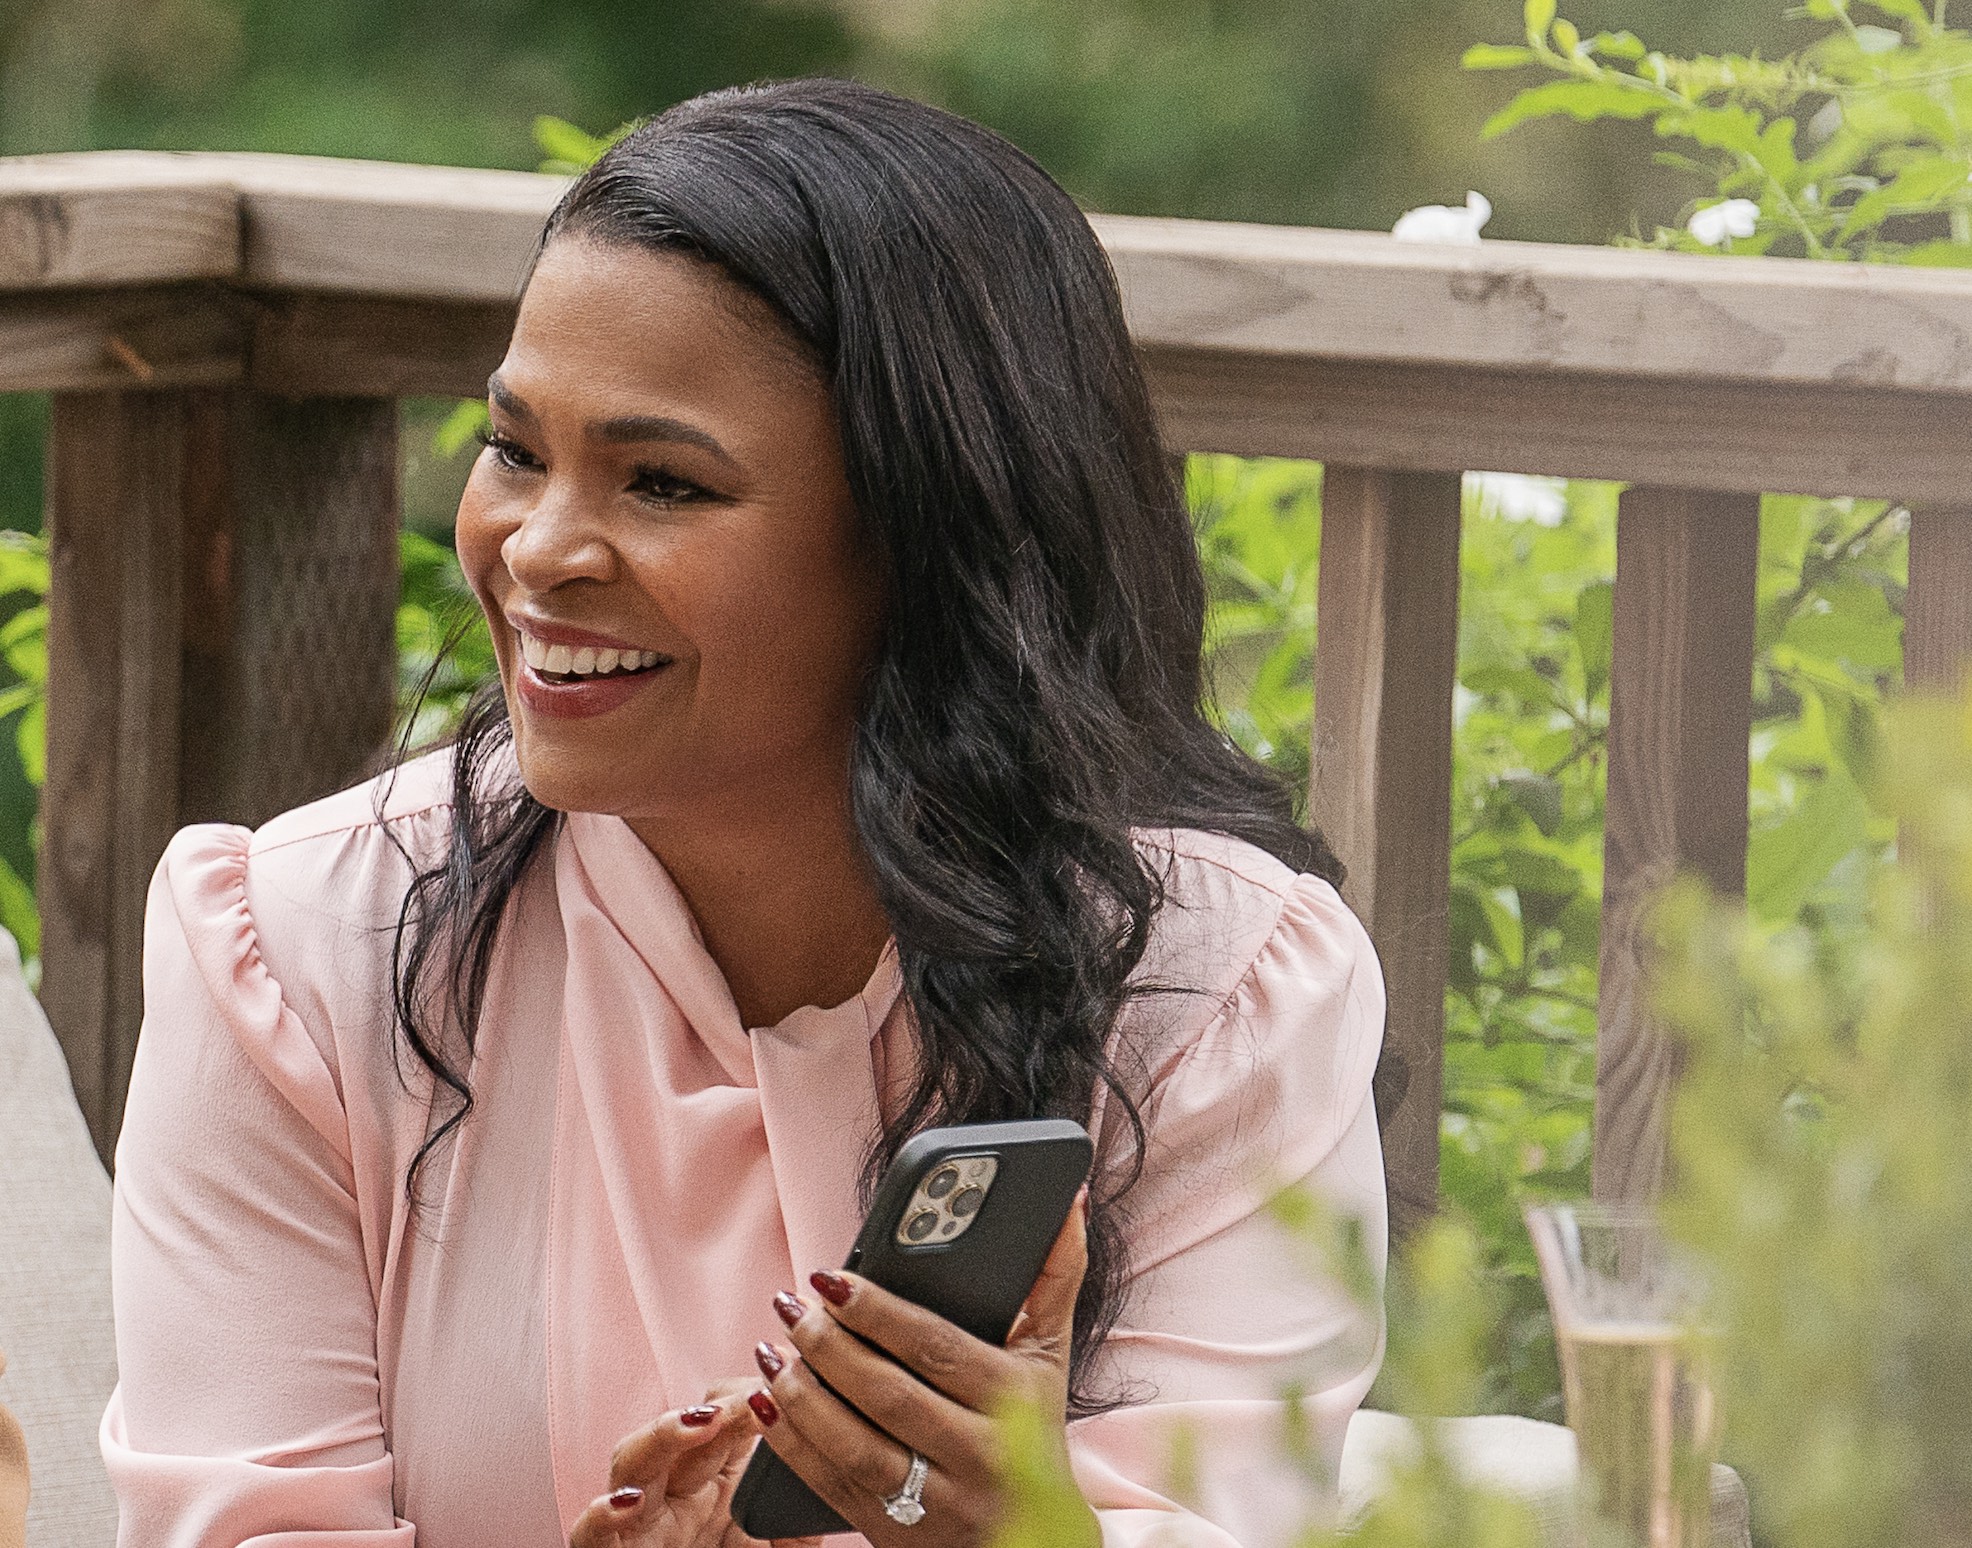 You People Cast on Netflix - Nia Long as Fatima Mohammed